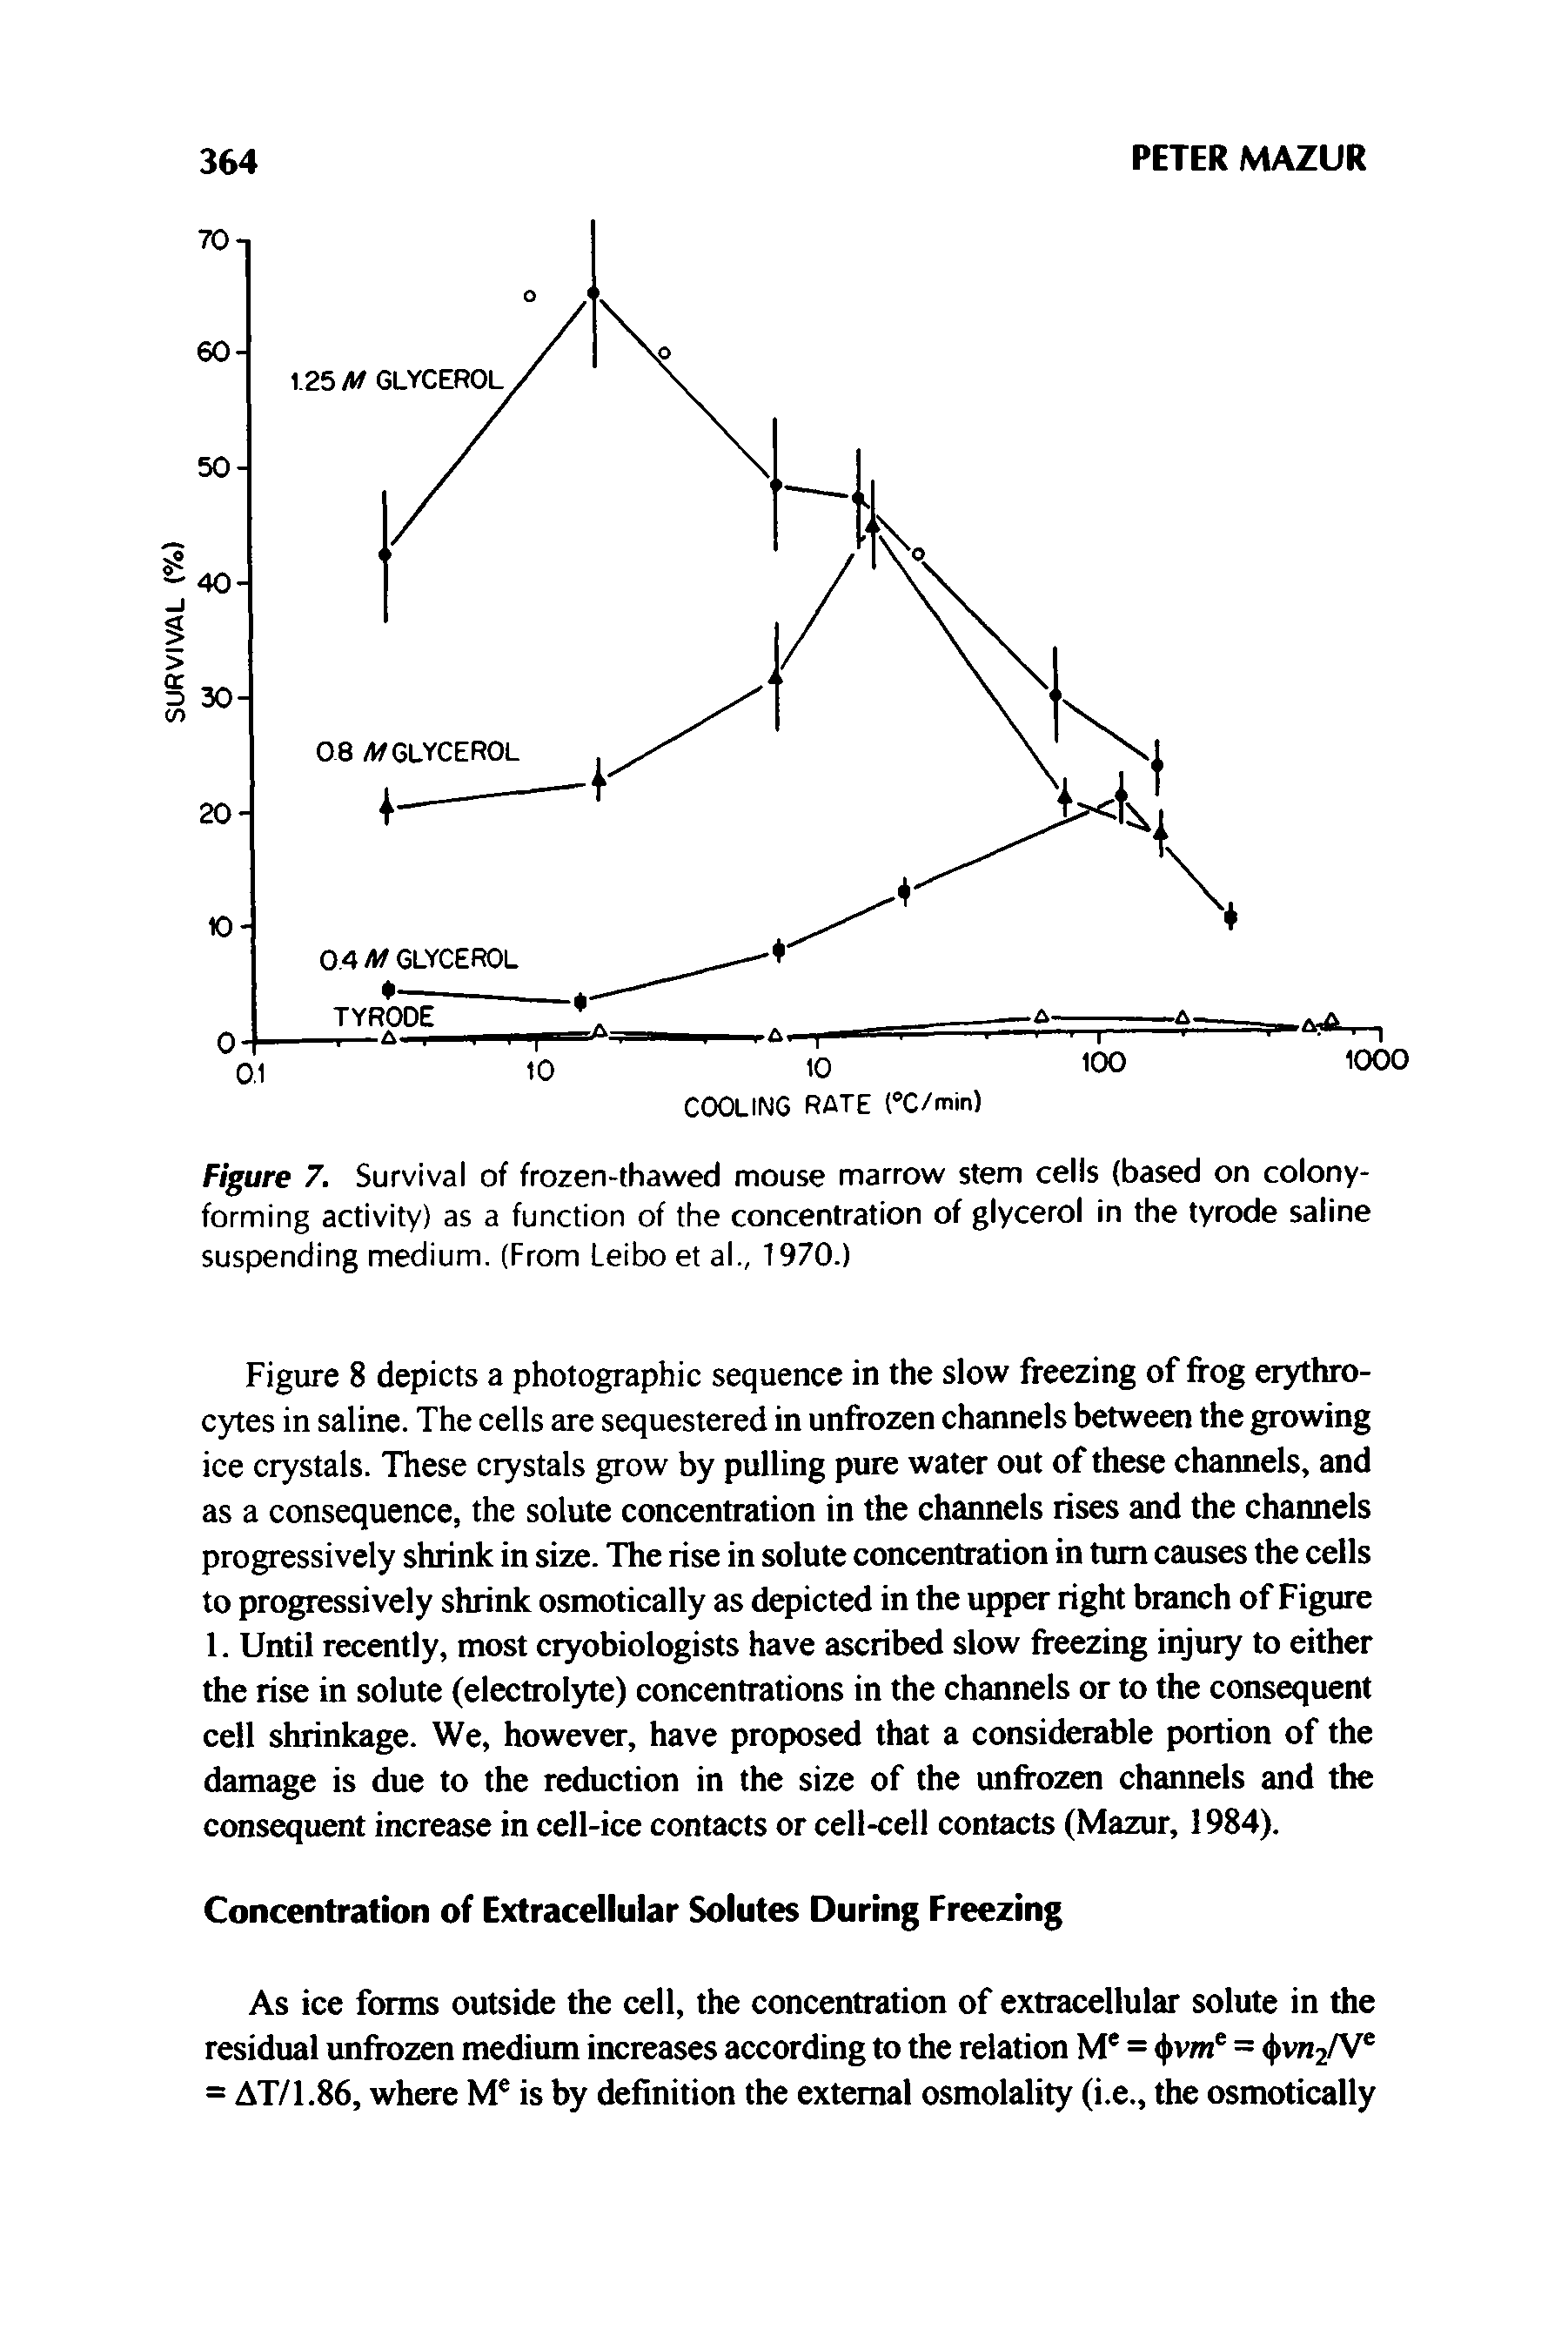 Figure 7. Survival of frozen-thawed mouse marrow stem cells based on colonyforming activity) as a function of the concentration of glycerol in the tyrode saline suspending medium. (From Leibo et al., 1970.)...